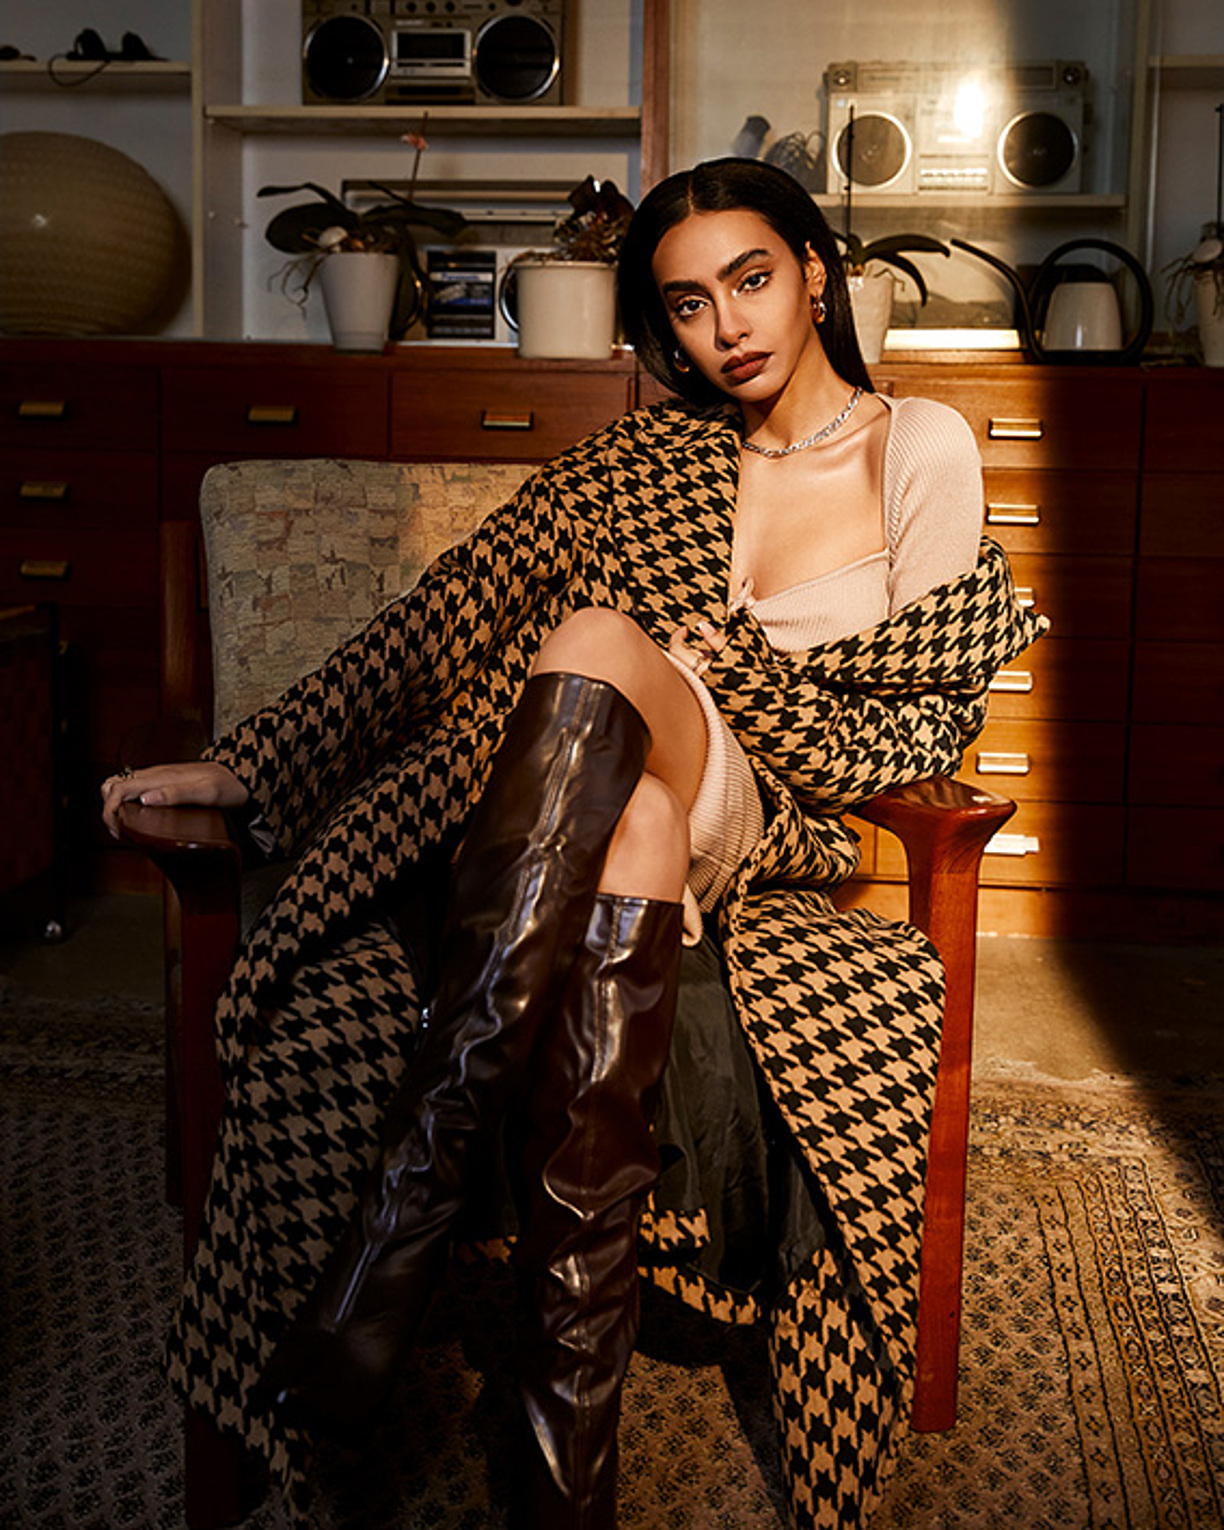 A model sit on the chair with a checkered coat and long brown boots